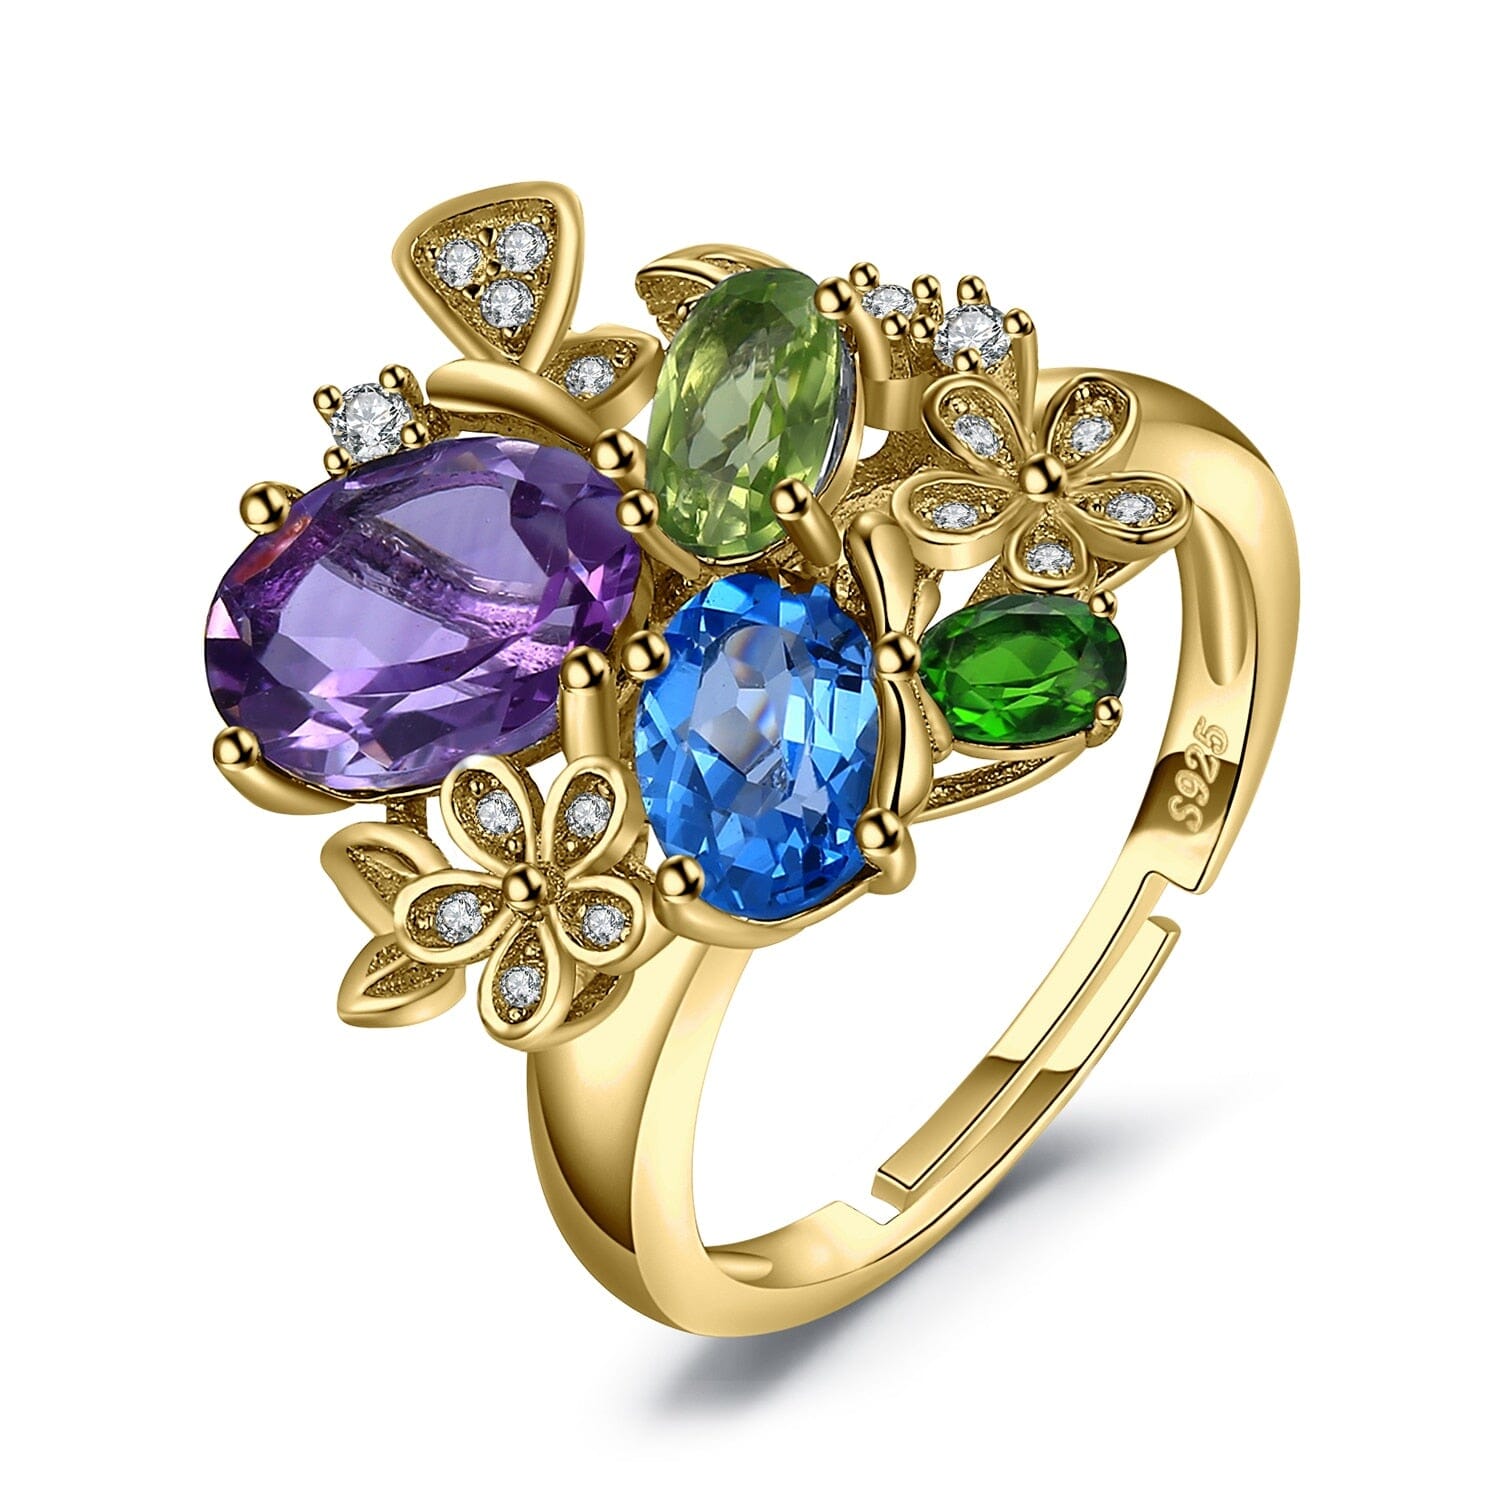 Flower Natural Amethyst Blue Topaz Peridot Chrome Diopside Open Adjustable Cocktail Ring-925 Sterling Silver WomenRingYellow Gold PlatedResizable